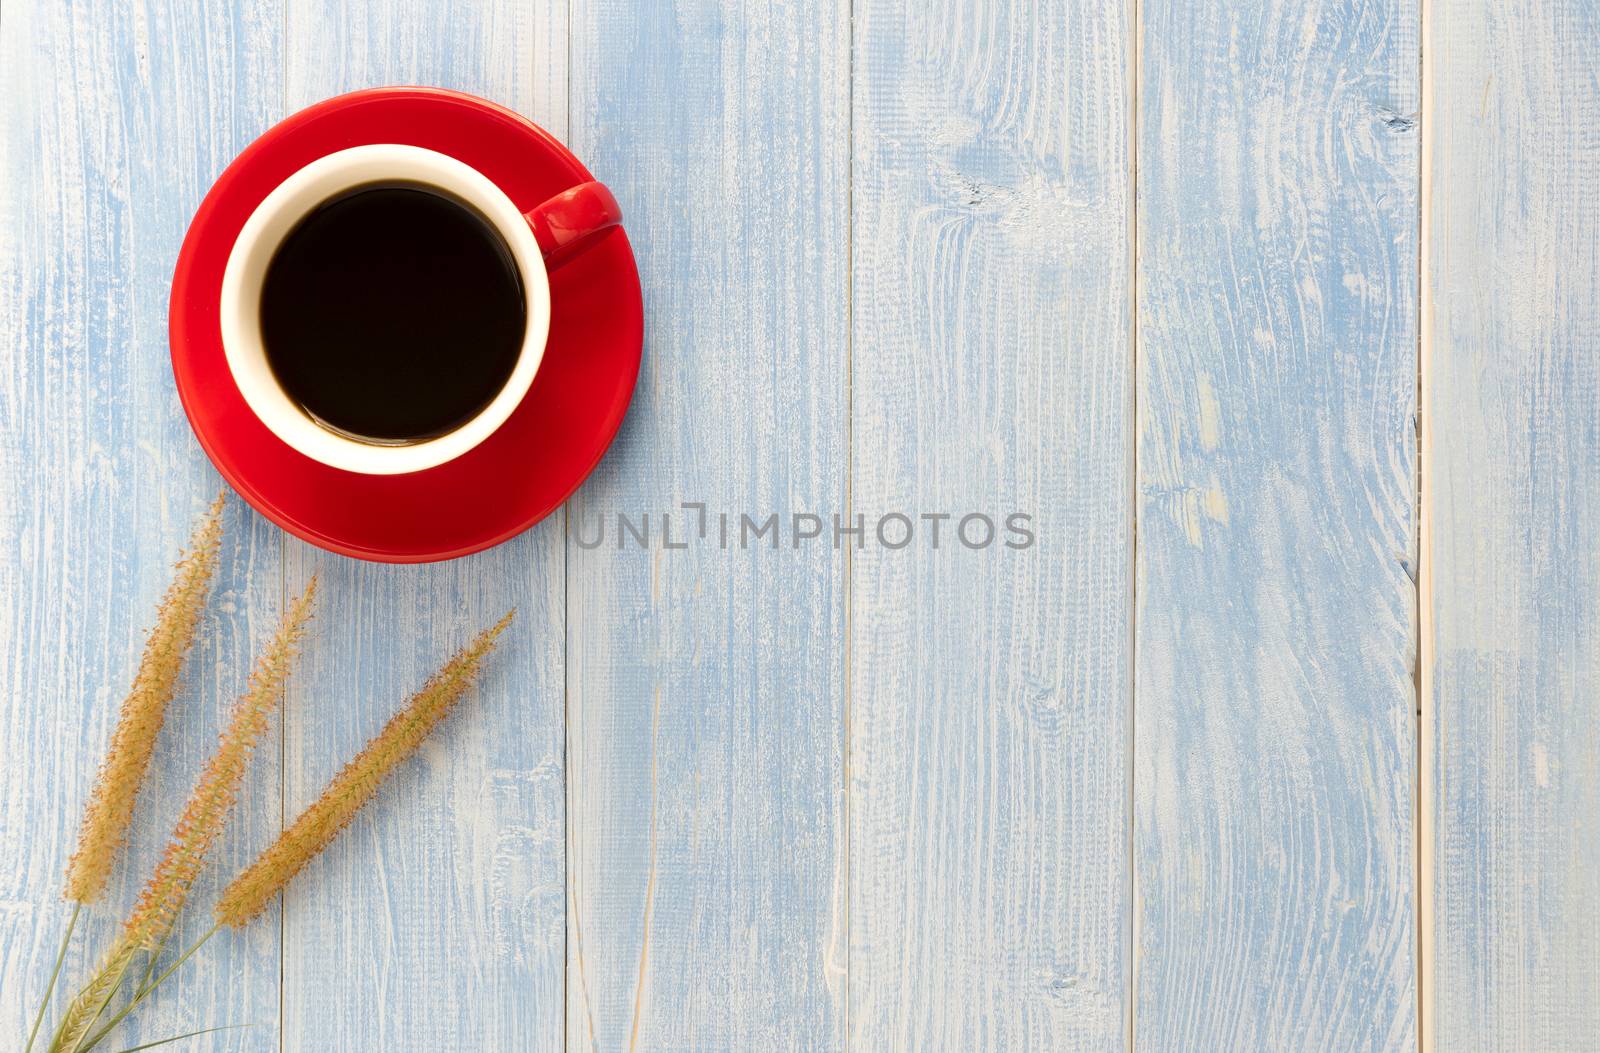 The grass flowers and red cup coffee on a wooden floor have a blue wooden floor as background.